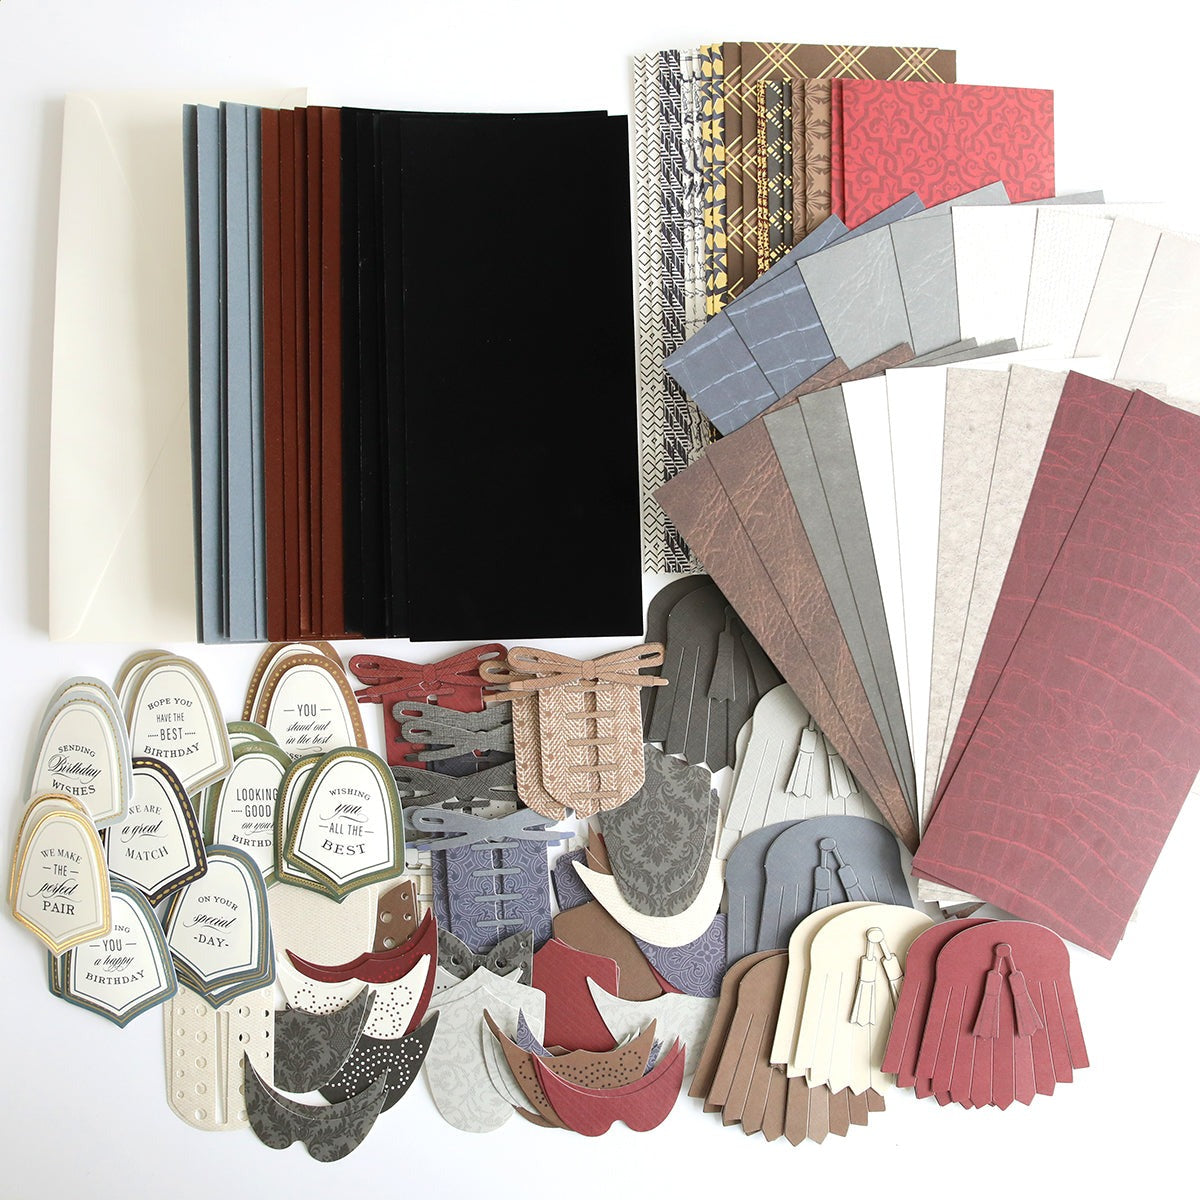 A variety of cardstock and paper crafting materials are arranged, including tags, decorative die-cut shapes, and patterned sheets in different colors and textures. The collection features elements from the Paper Wingtips Refill Kit, perfect for adding 3D embellishments to your projects.